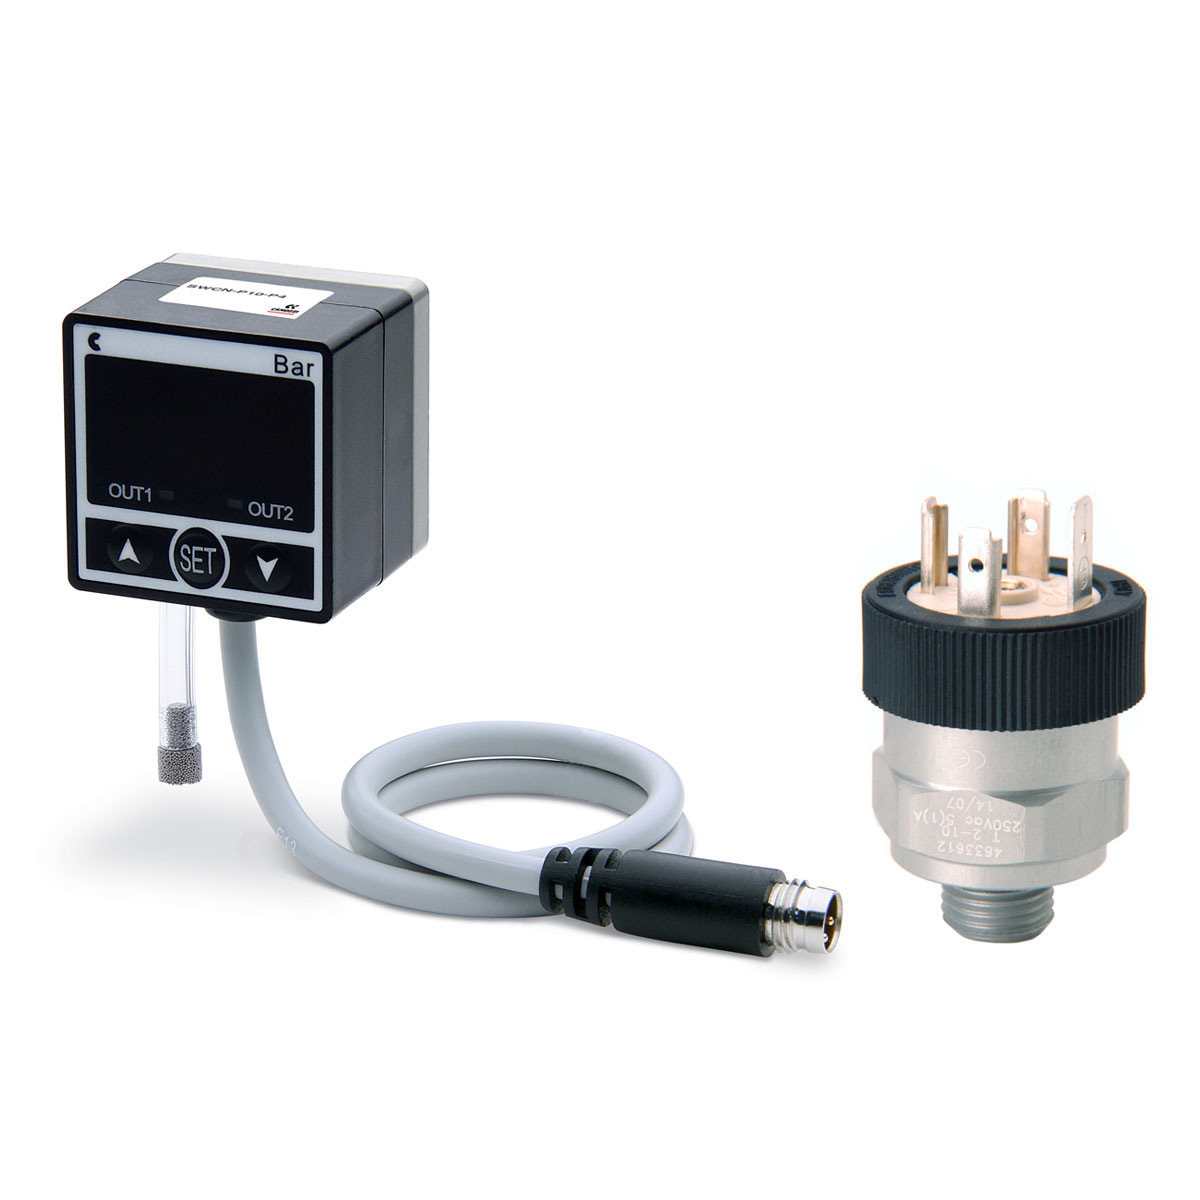 Pressure switches and vacuum switches